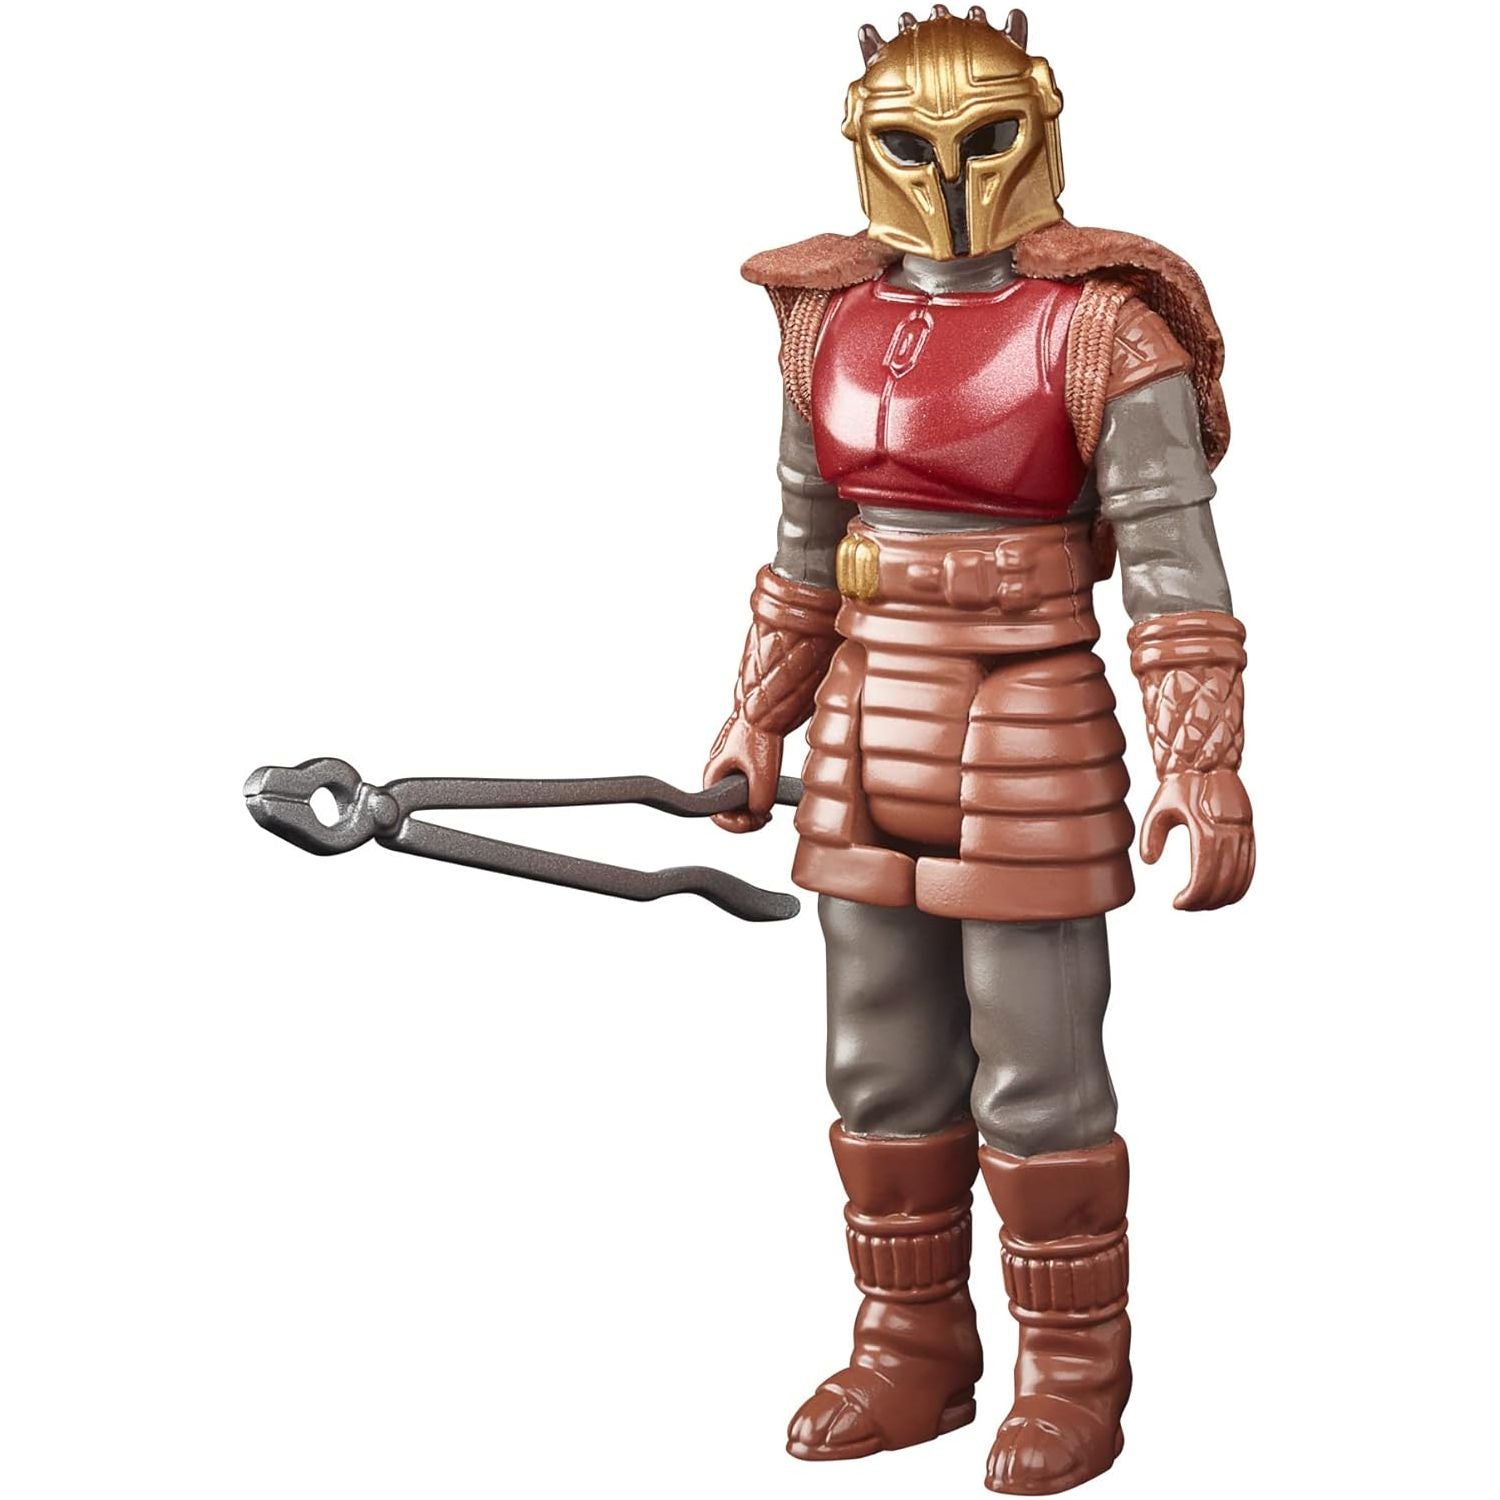 Hasbro STAR WARS Retro Collection The Armorer Toy 3.75-Inch-Scale The Mandalorian Collectible Action Figure